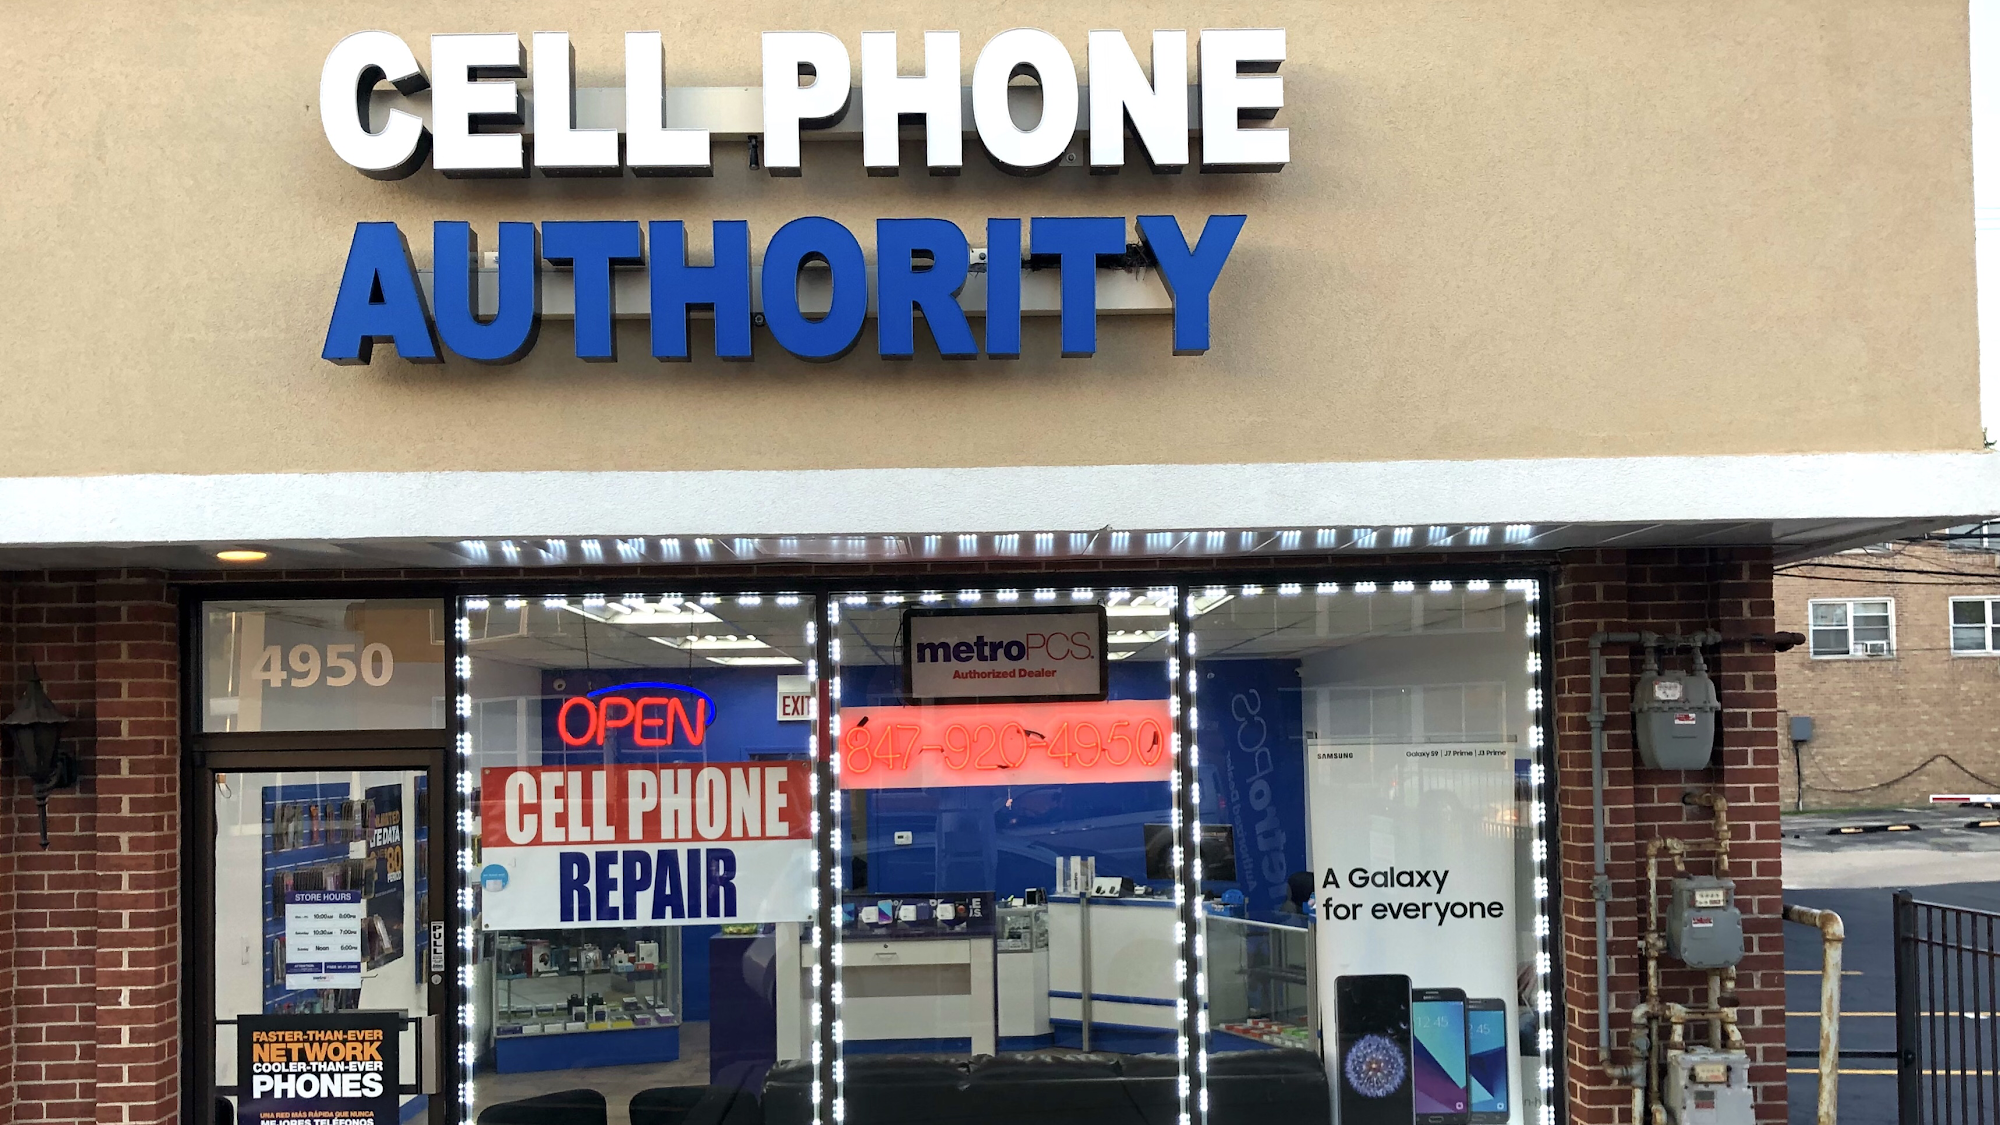 CELL PHONE AUTHORITY